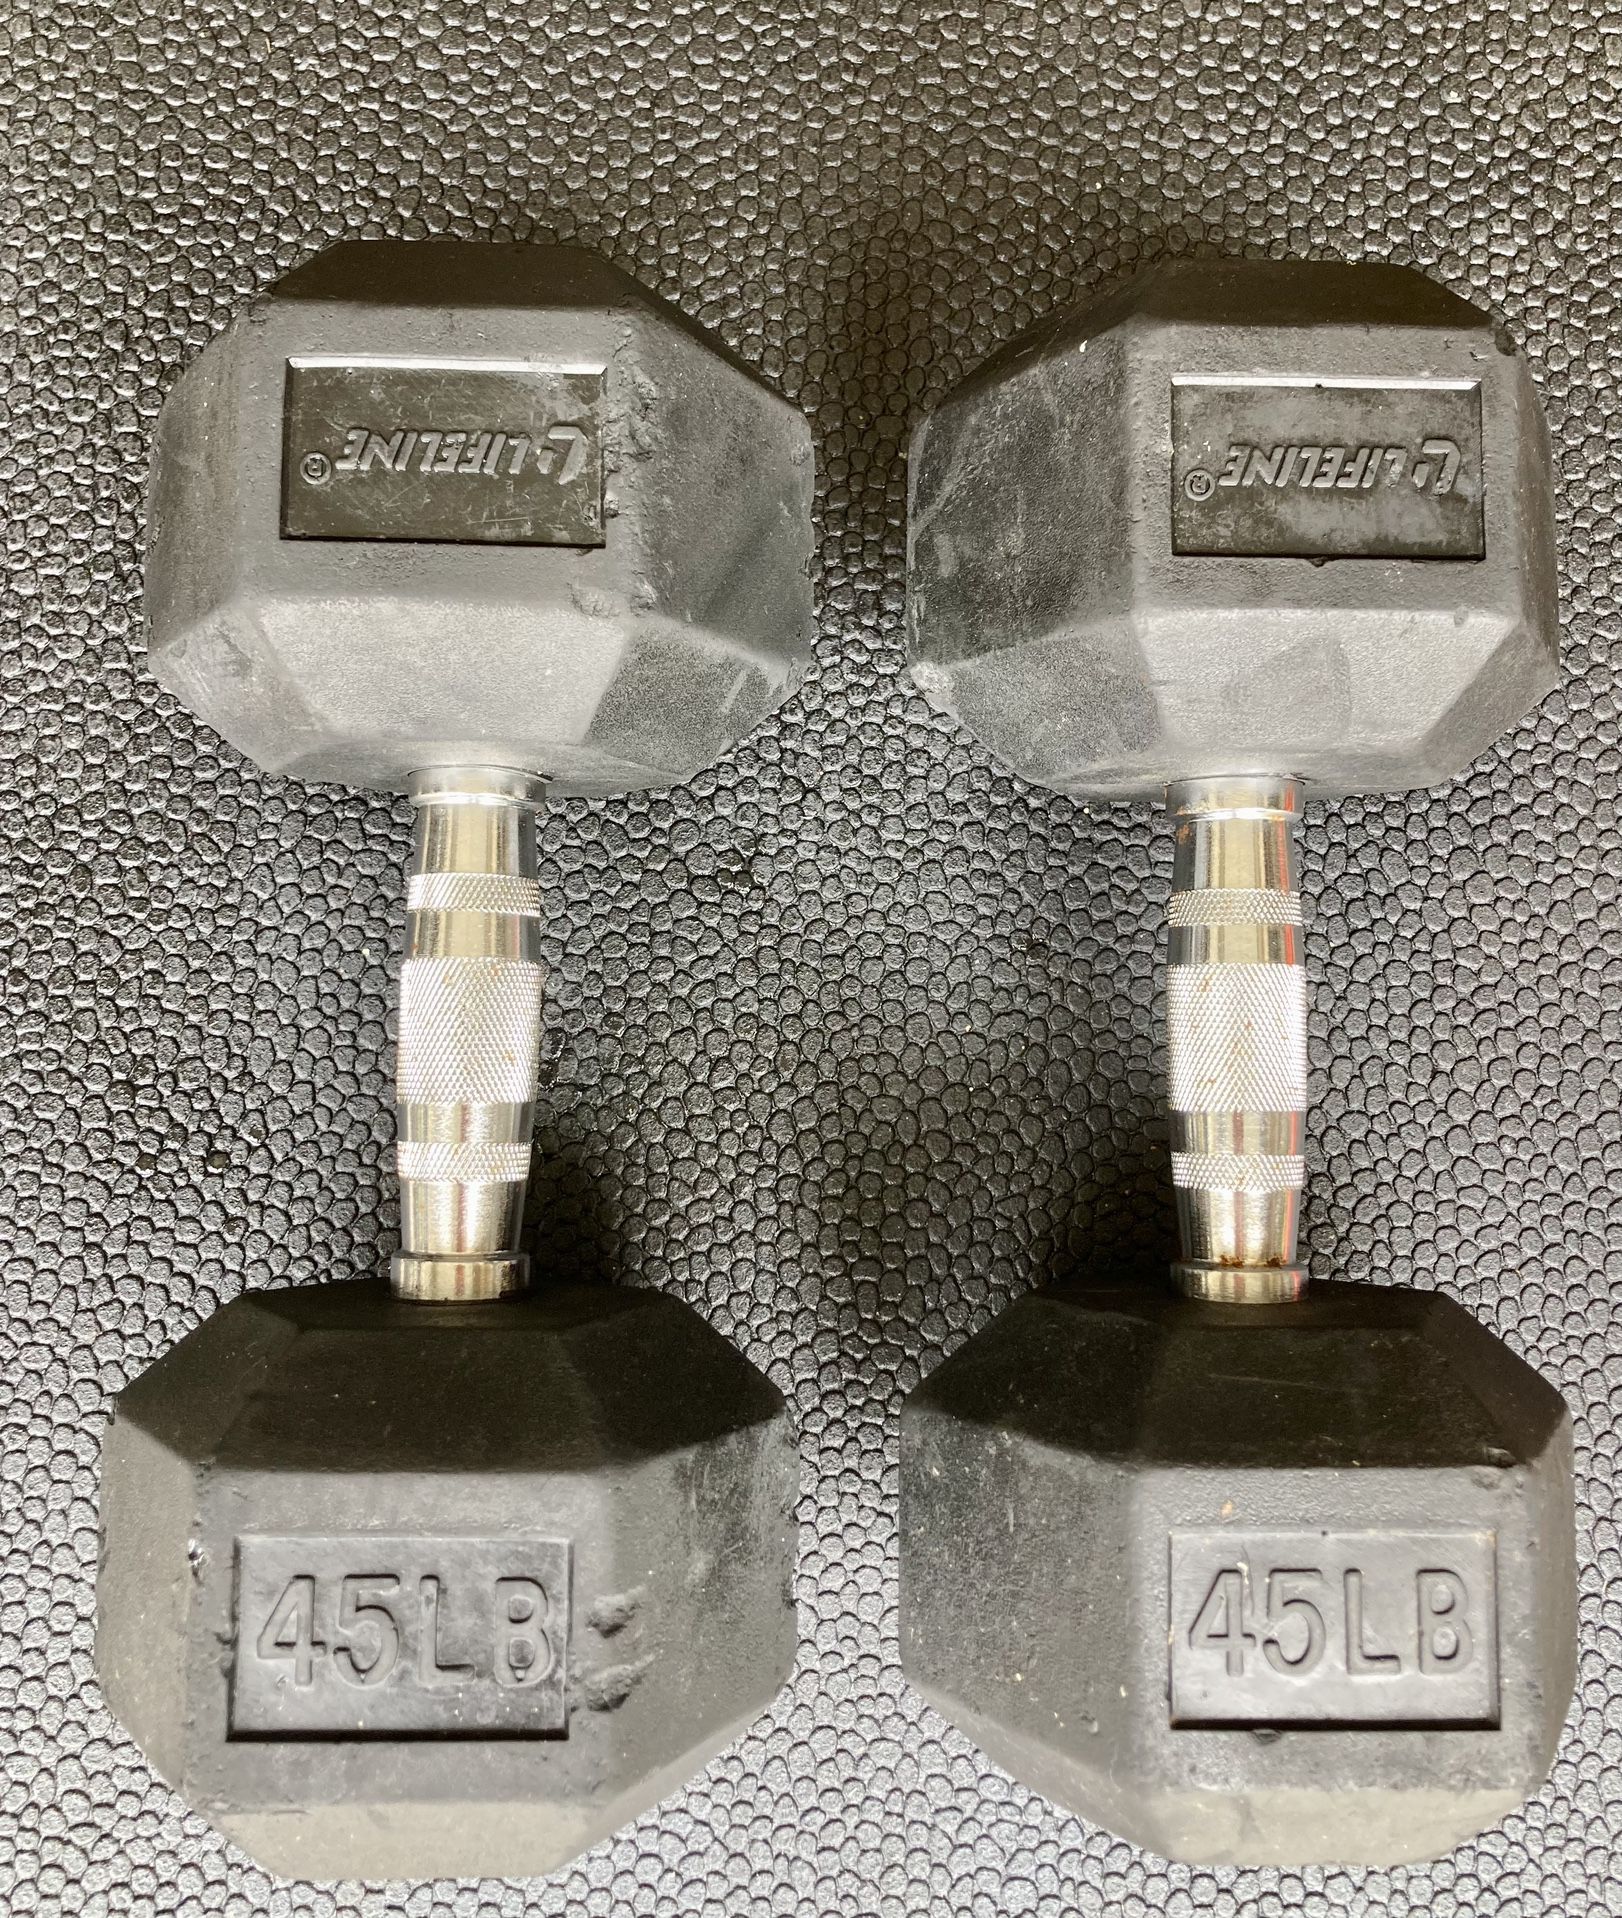 Pair of 45 Pound Dumbbells DBs Weights Set 90 Pounds Total Lifeline